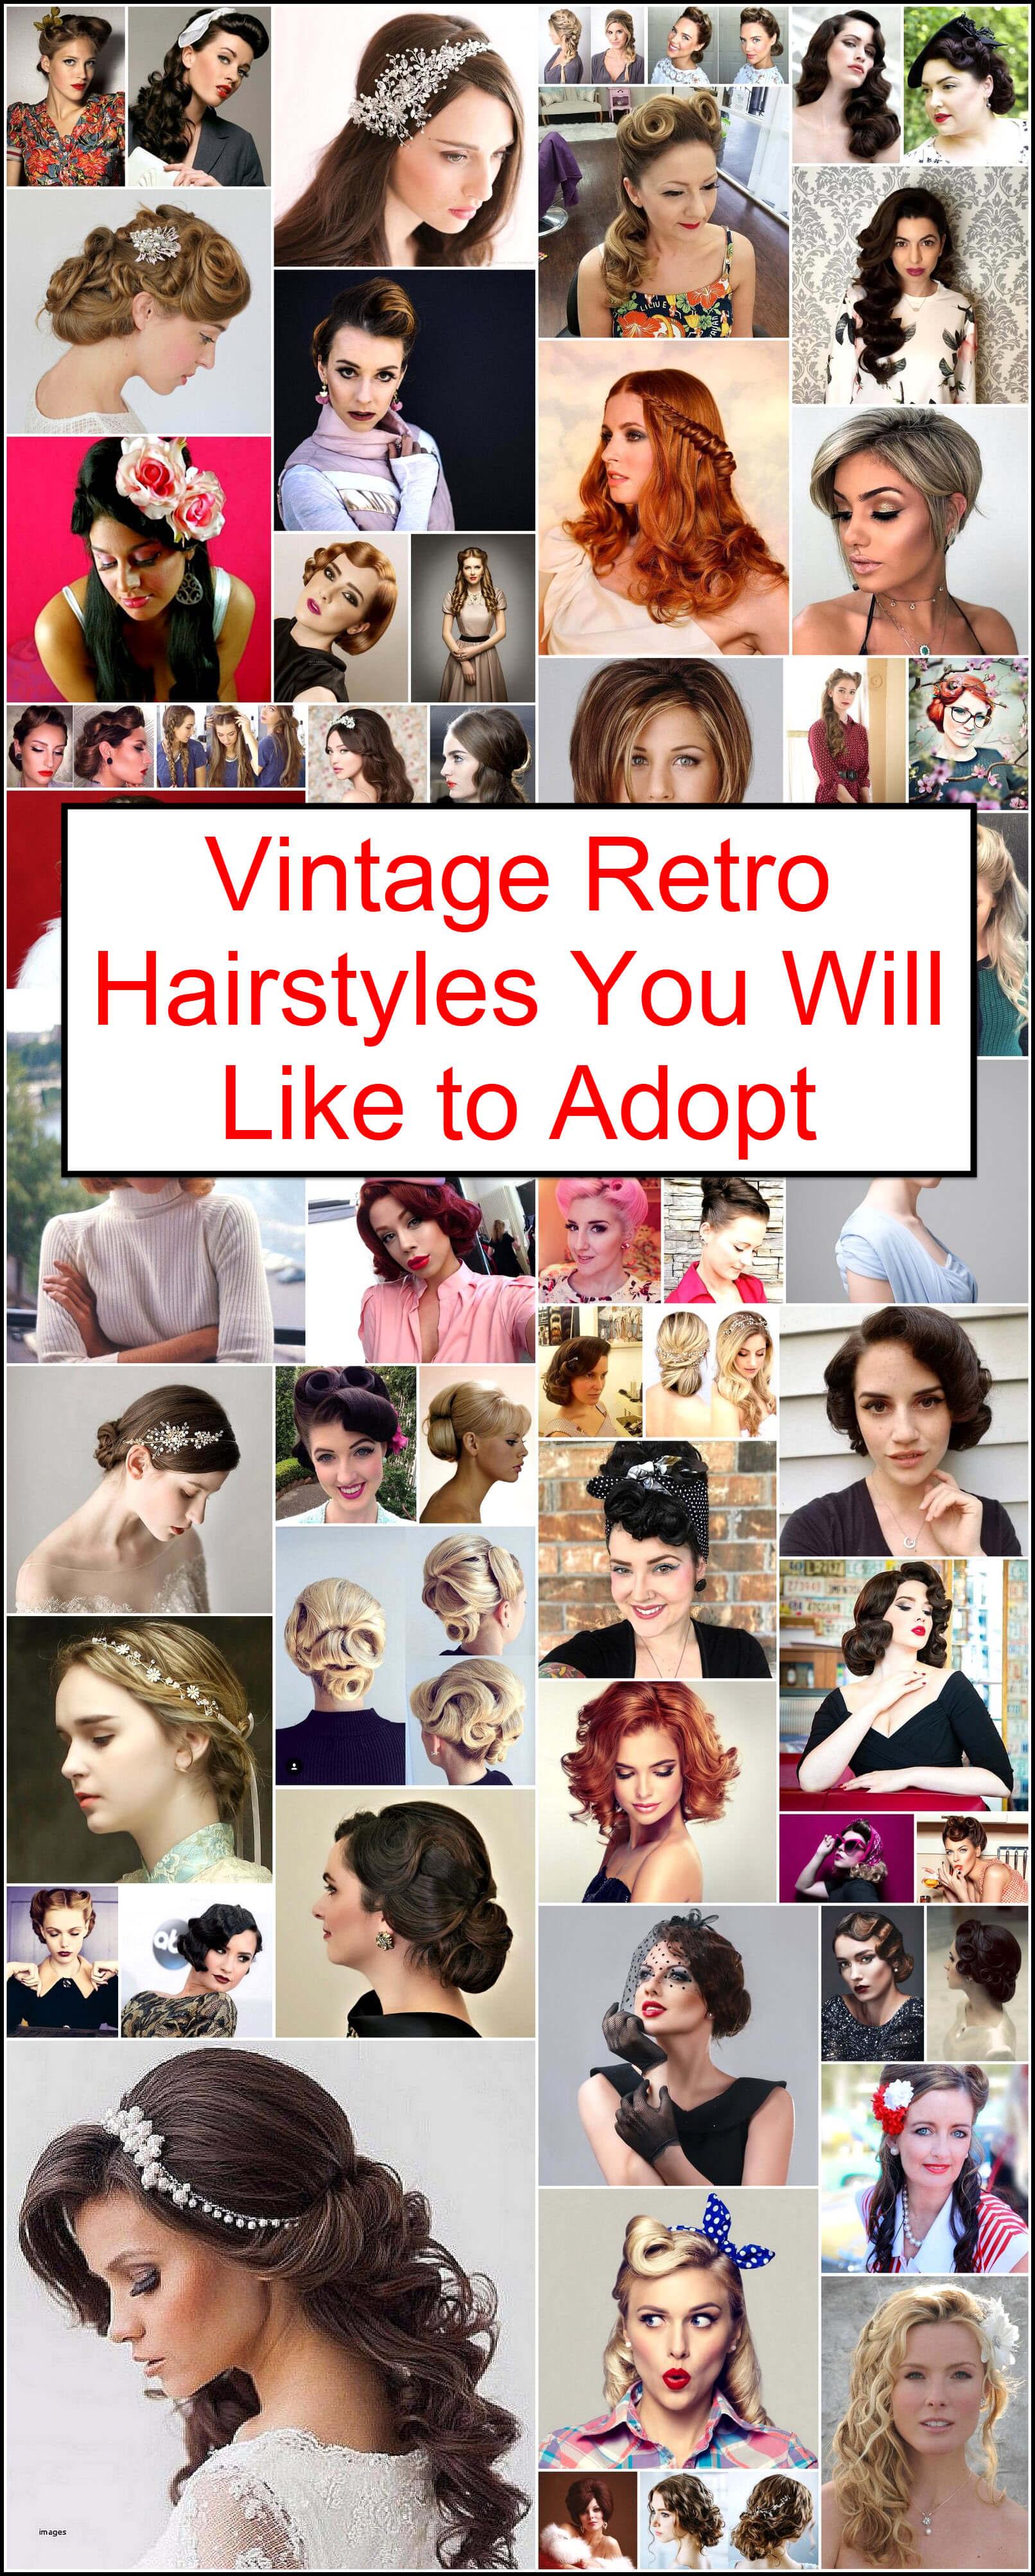 Bring On The Old-World Charm With Vintage Hairstyles This Wedding Season